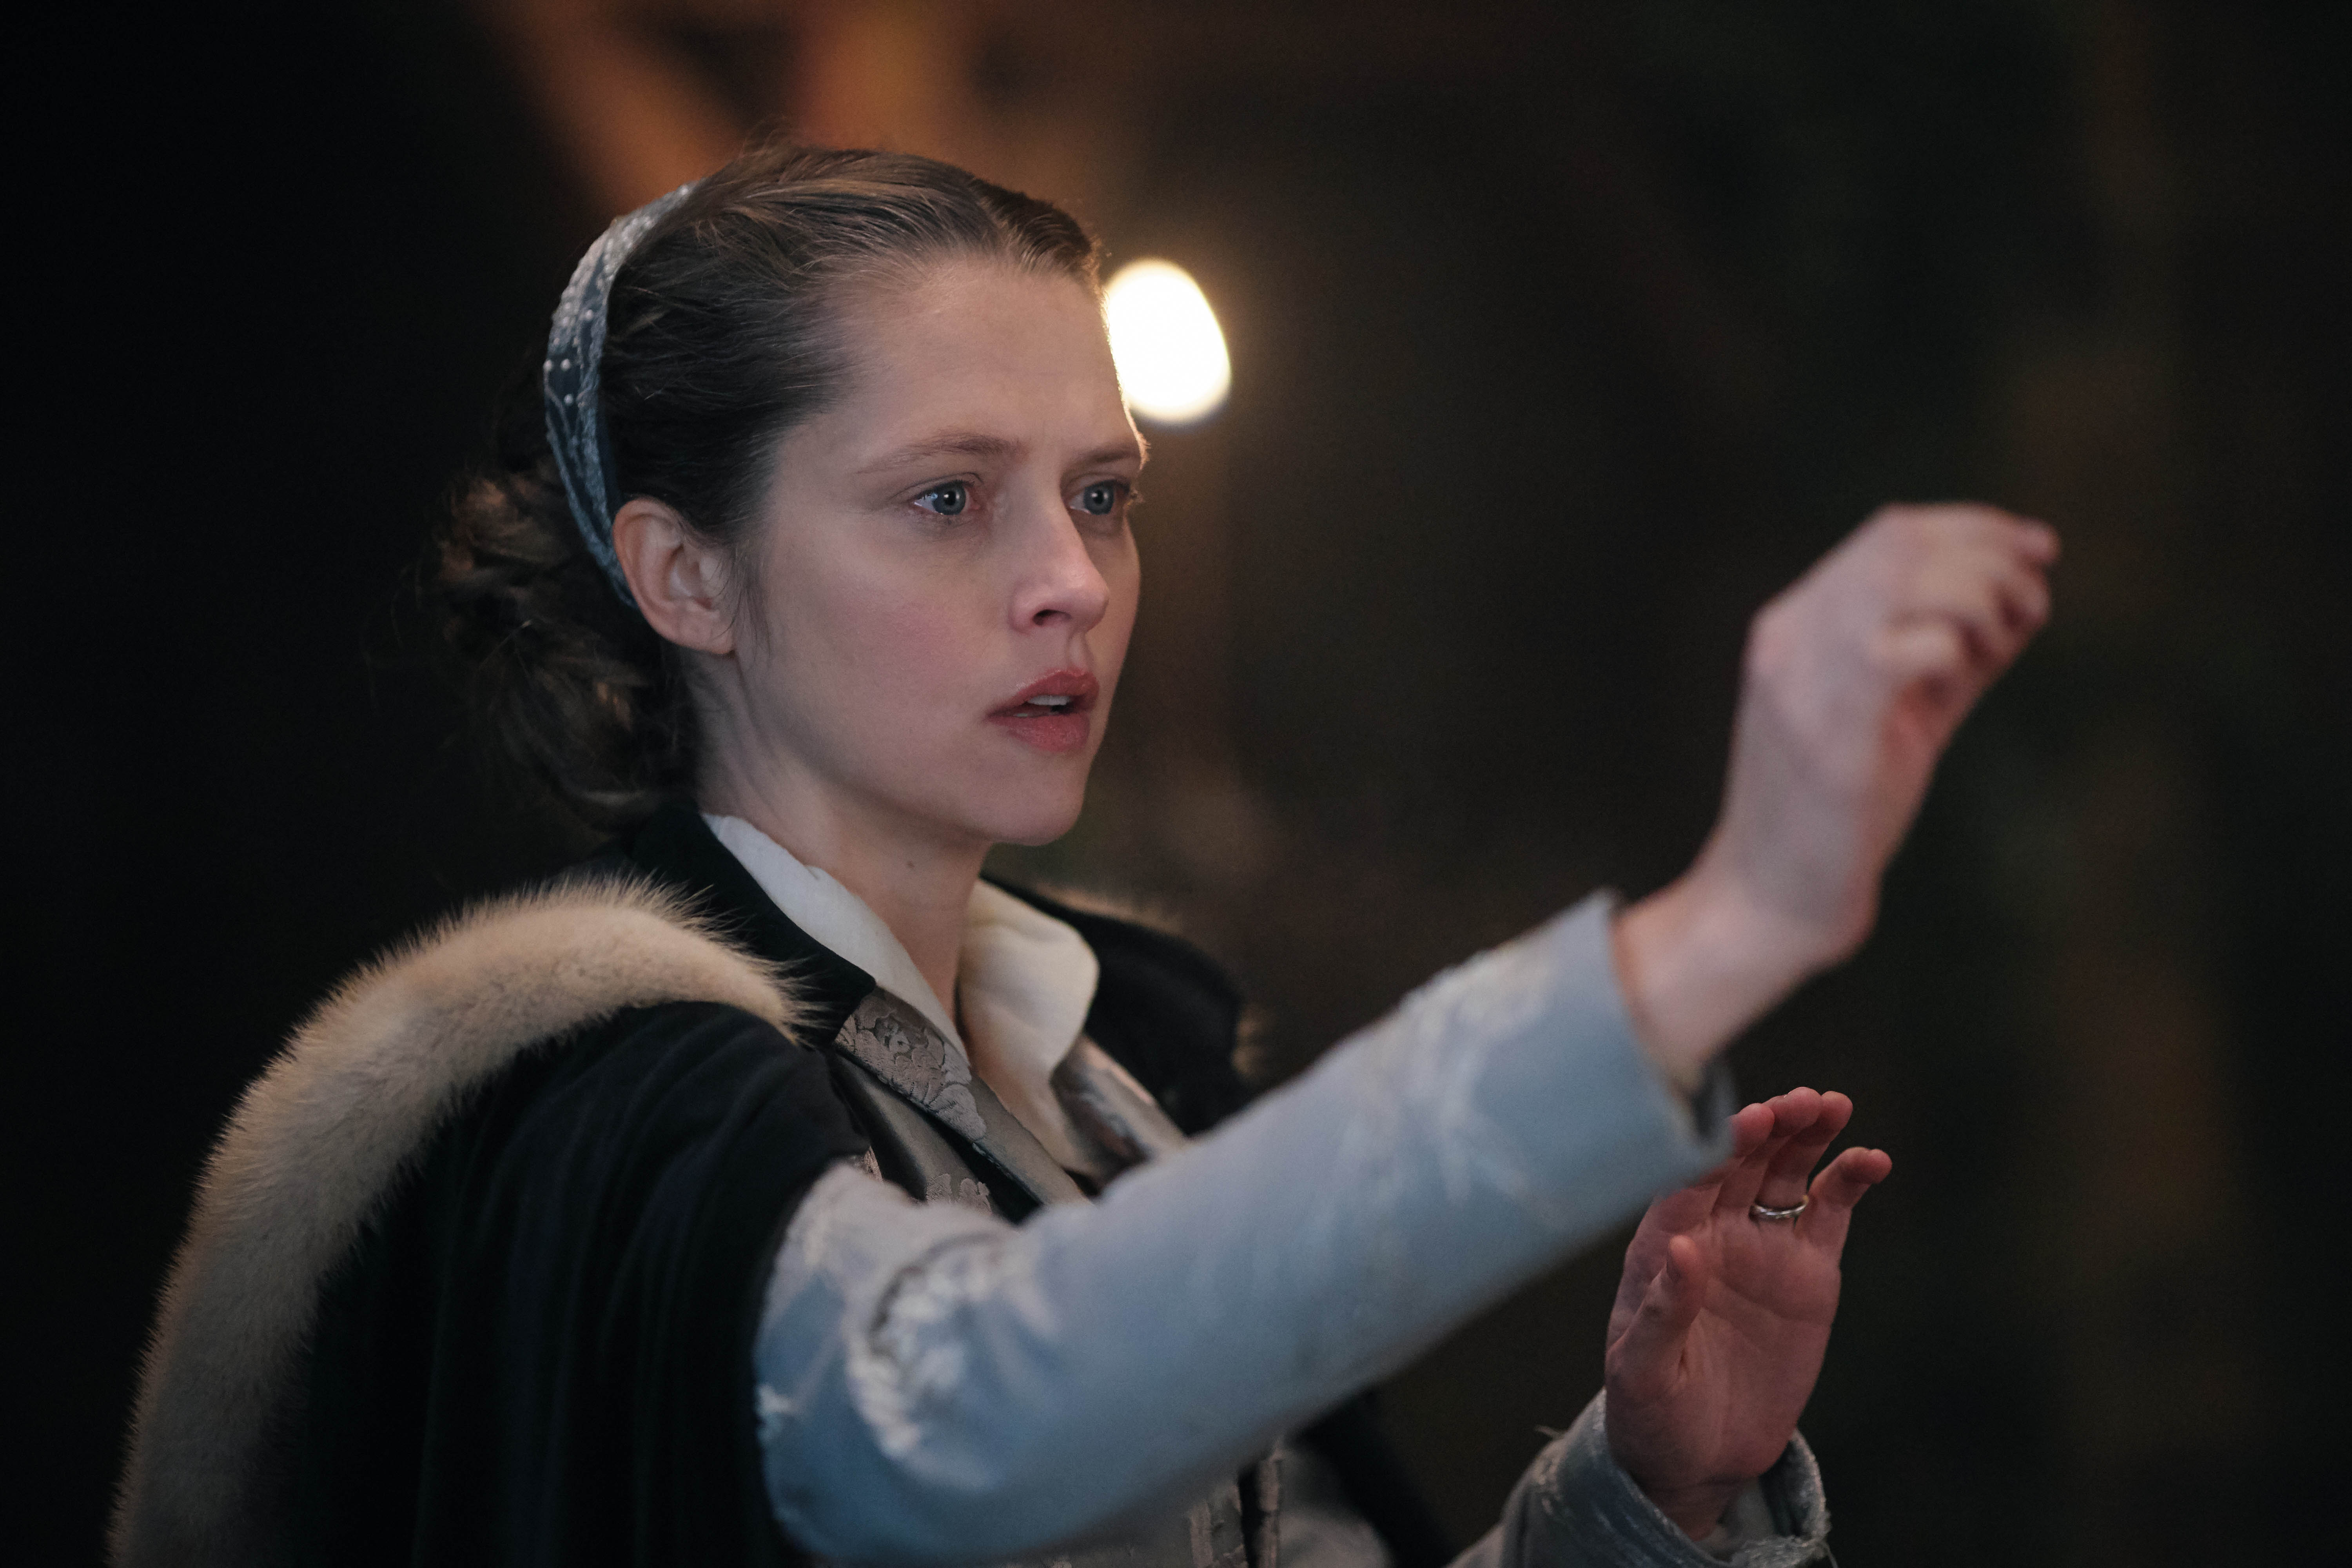 Diana performing a spell in 'A Discovery of Witches' Season 2